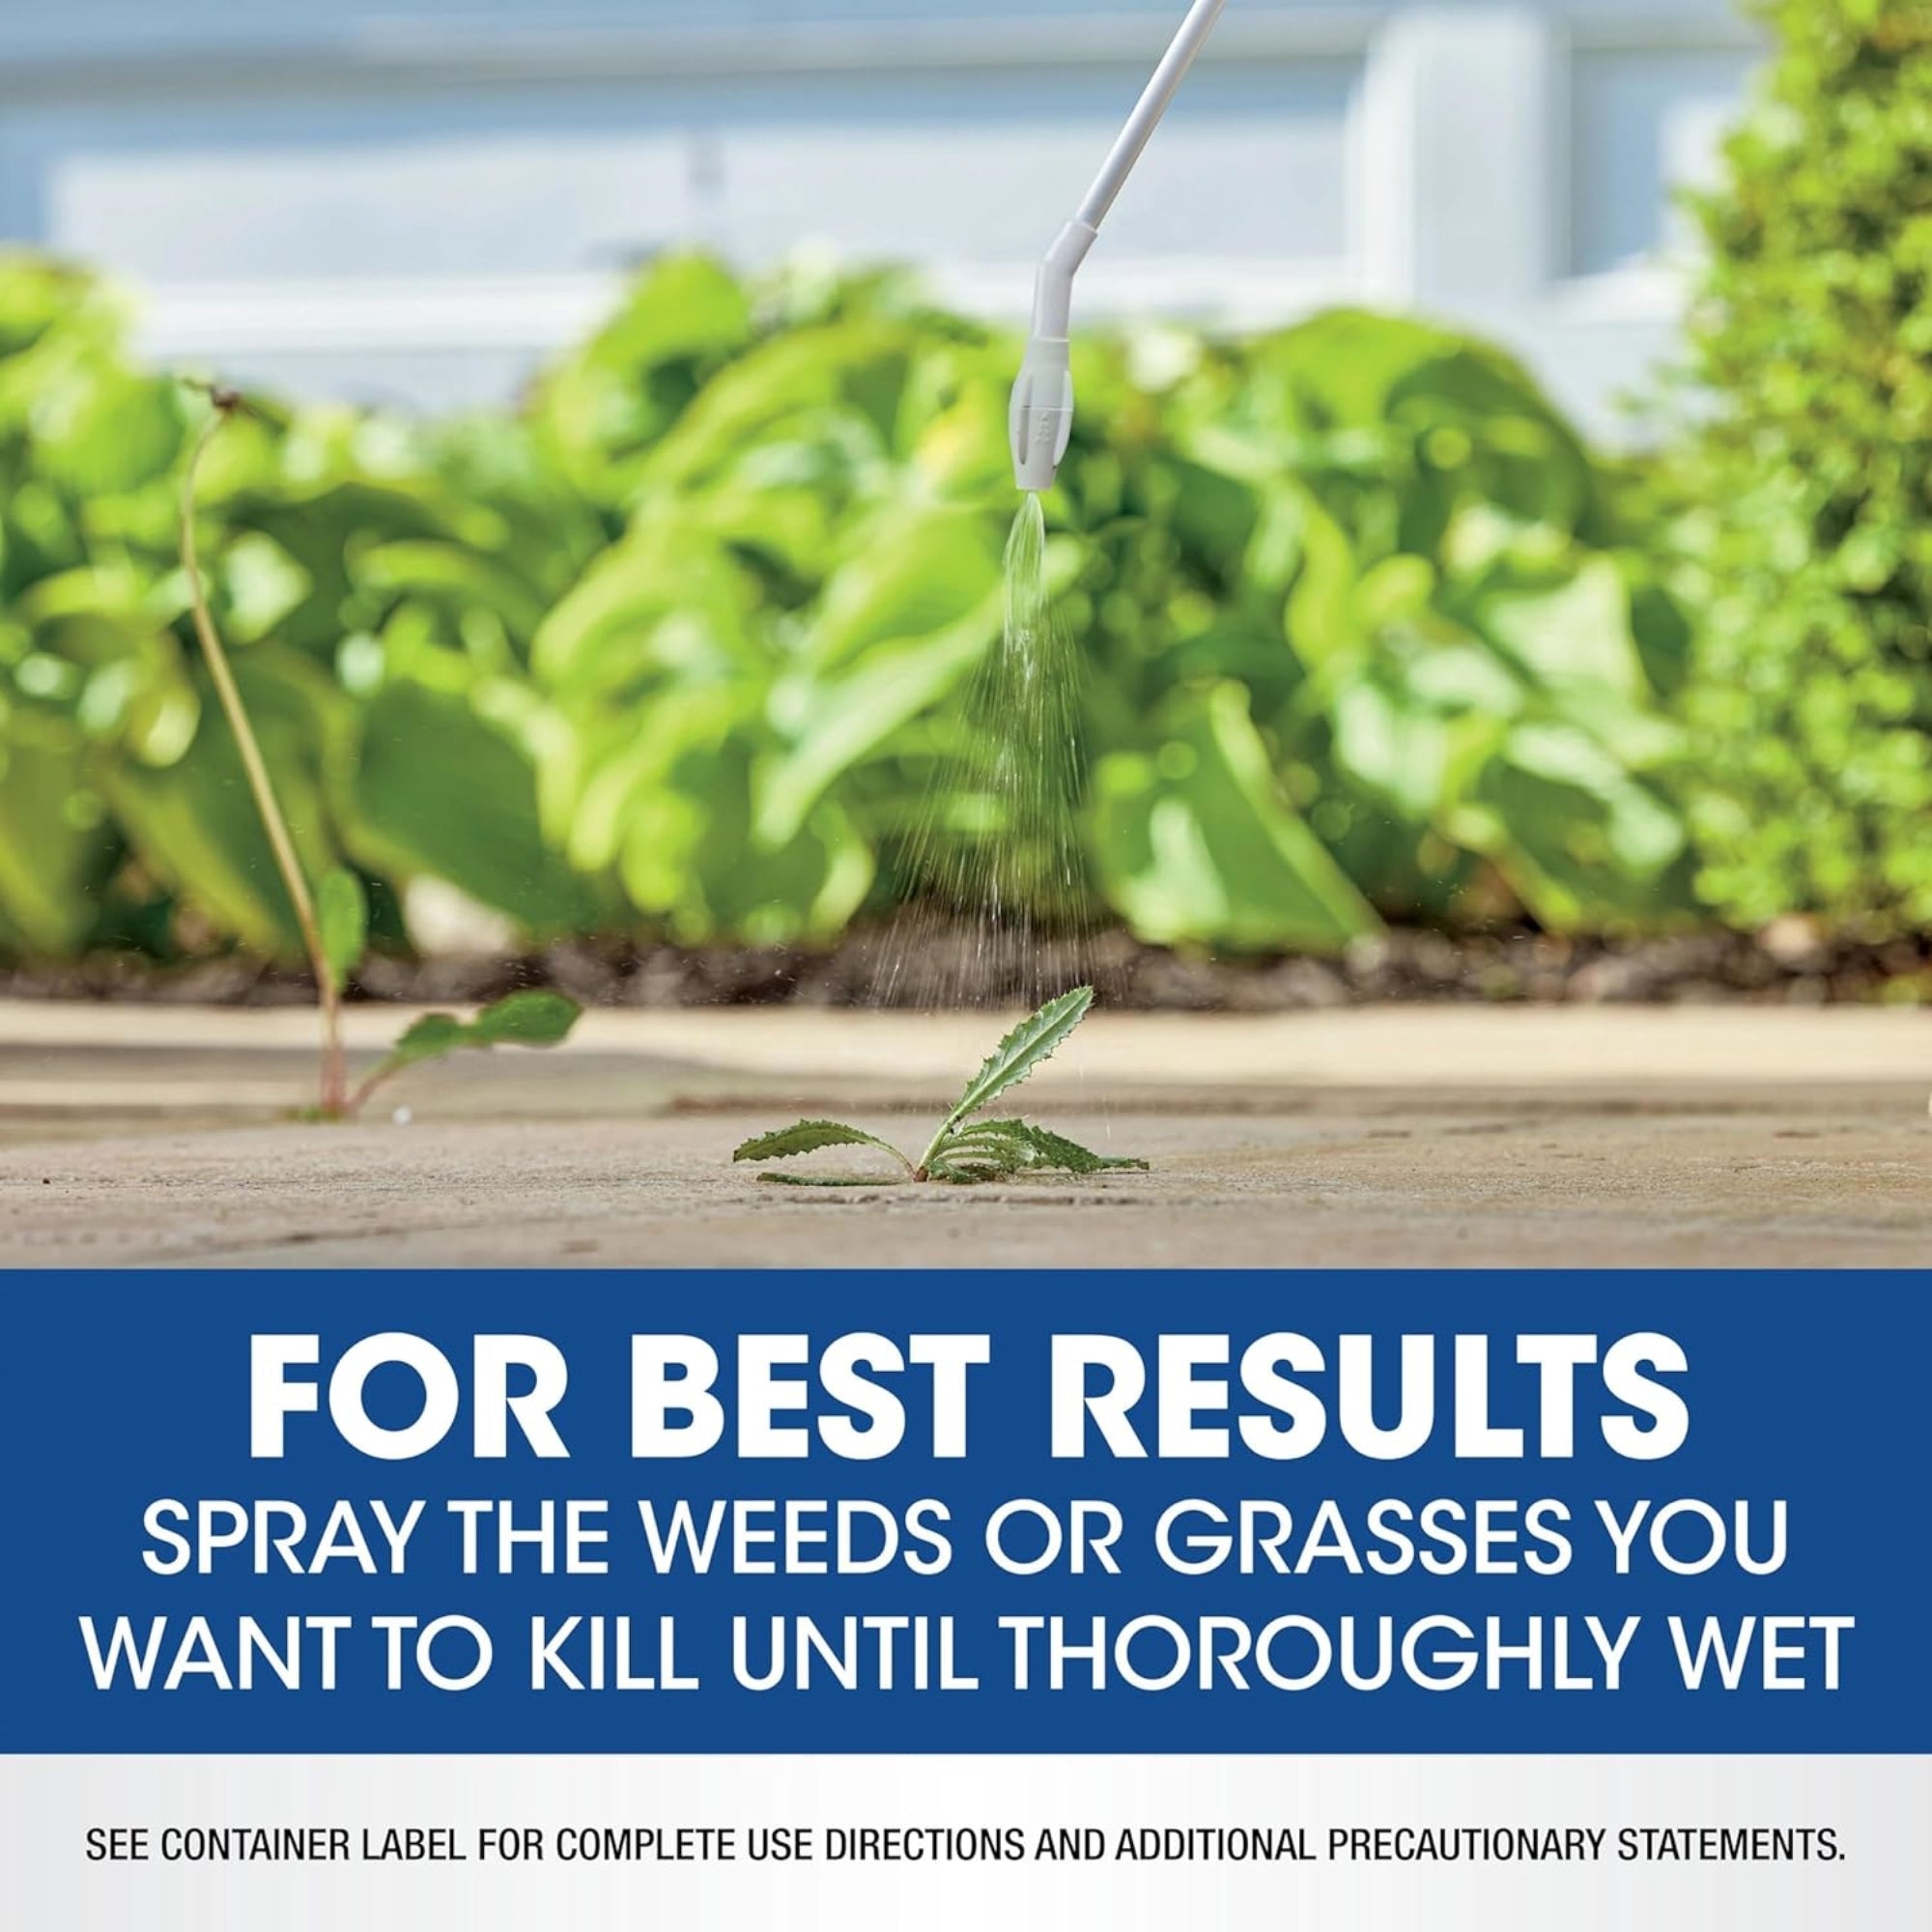 Roundup Ready-to-Use Weed & Grass Killer, Best Around Flower Beds, Trees, and Driveways, 1 Gal